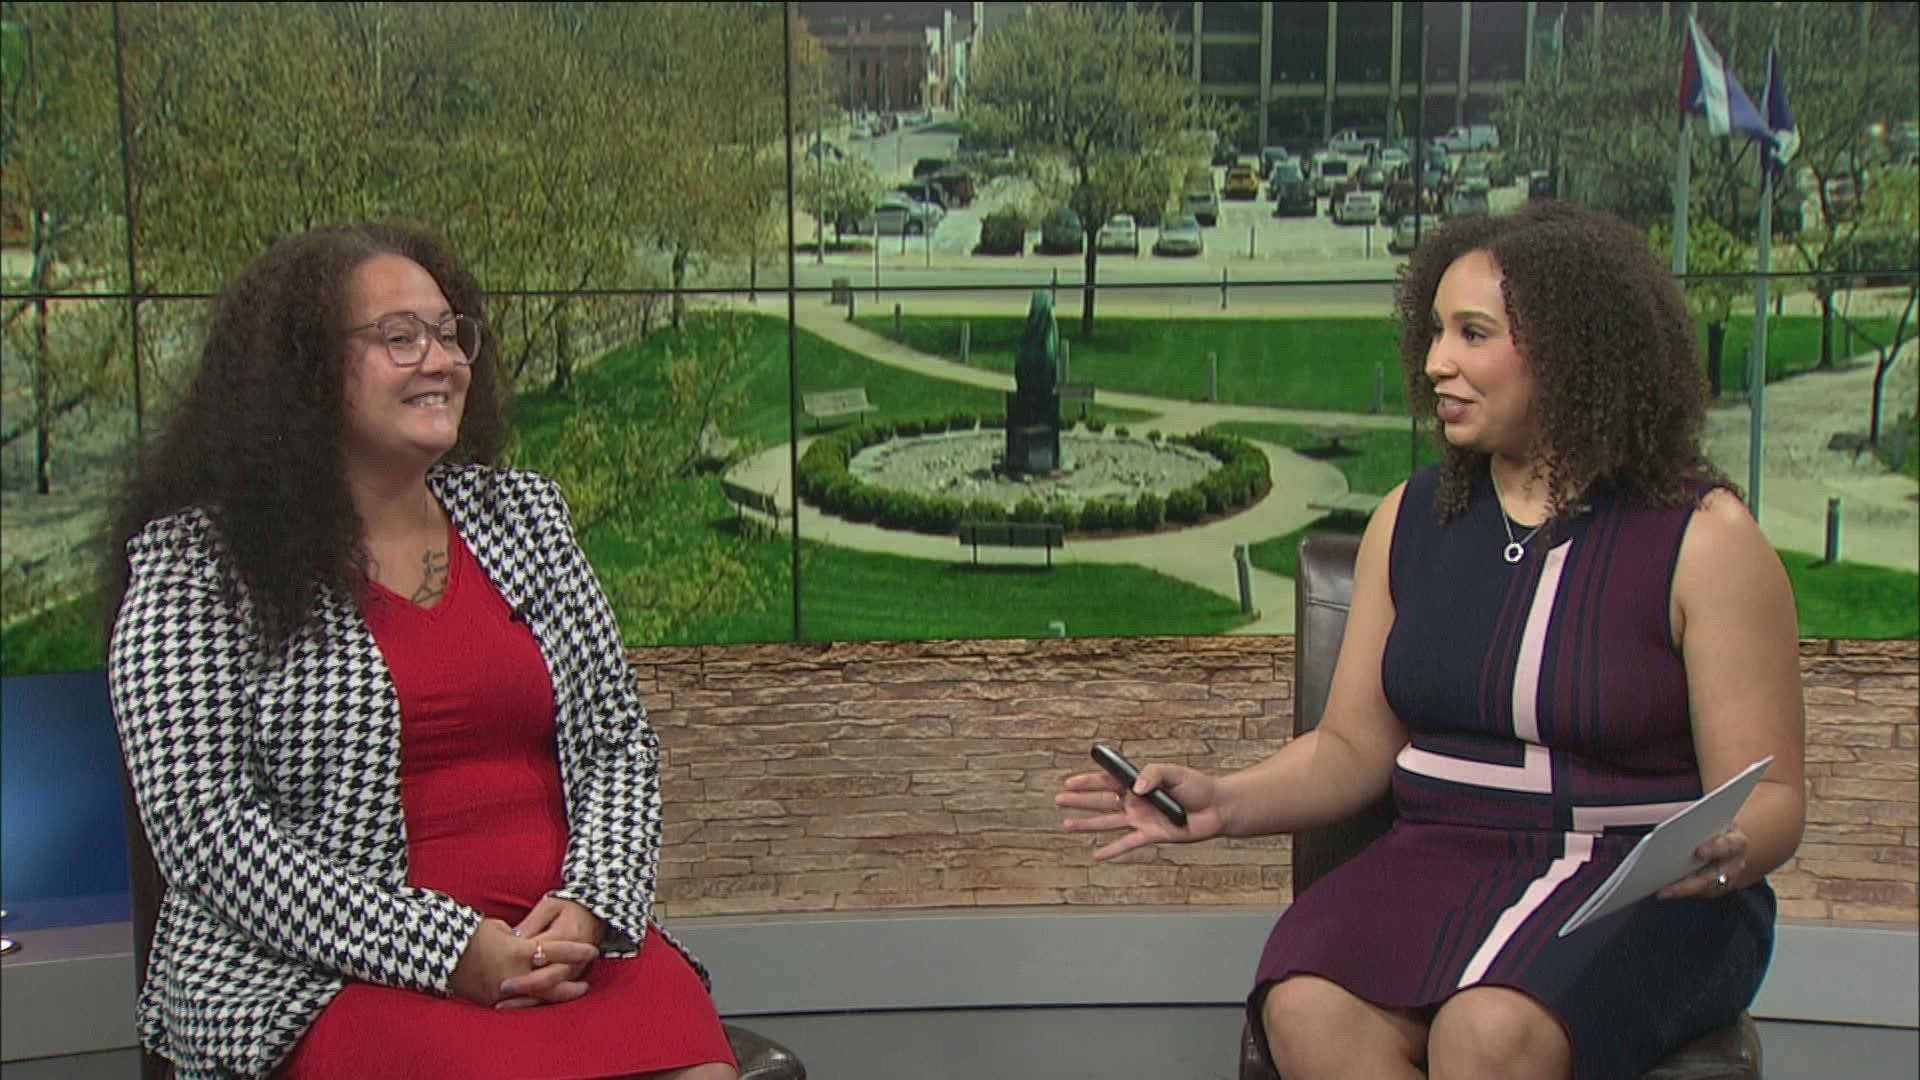 Alicia Boreman, child counselor expert and Clinical Director of the Children's Resource Center, sits down with Caylee Kirby to discuss kids going back to class.